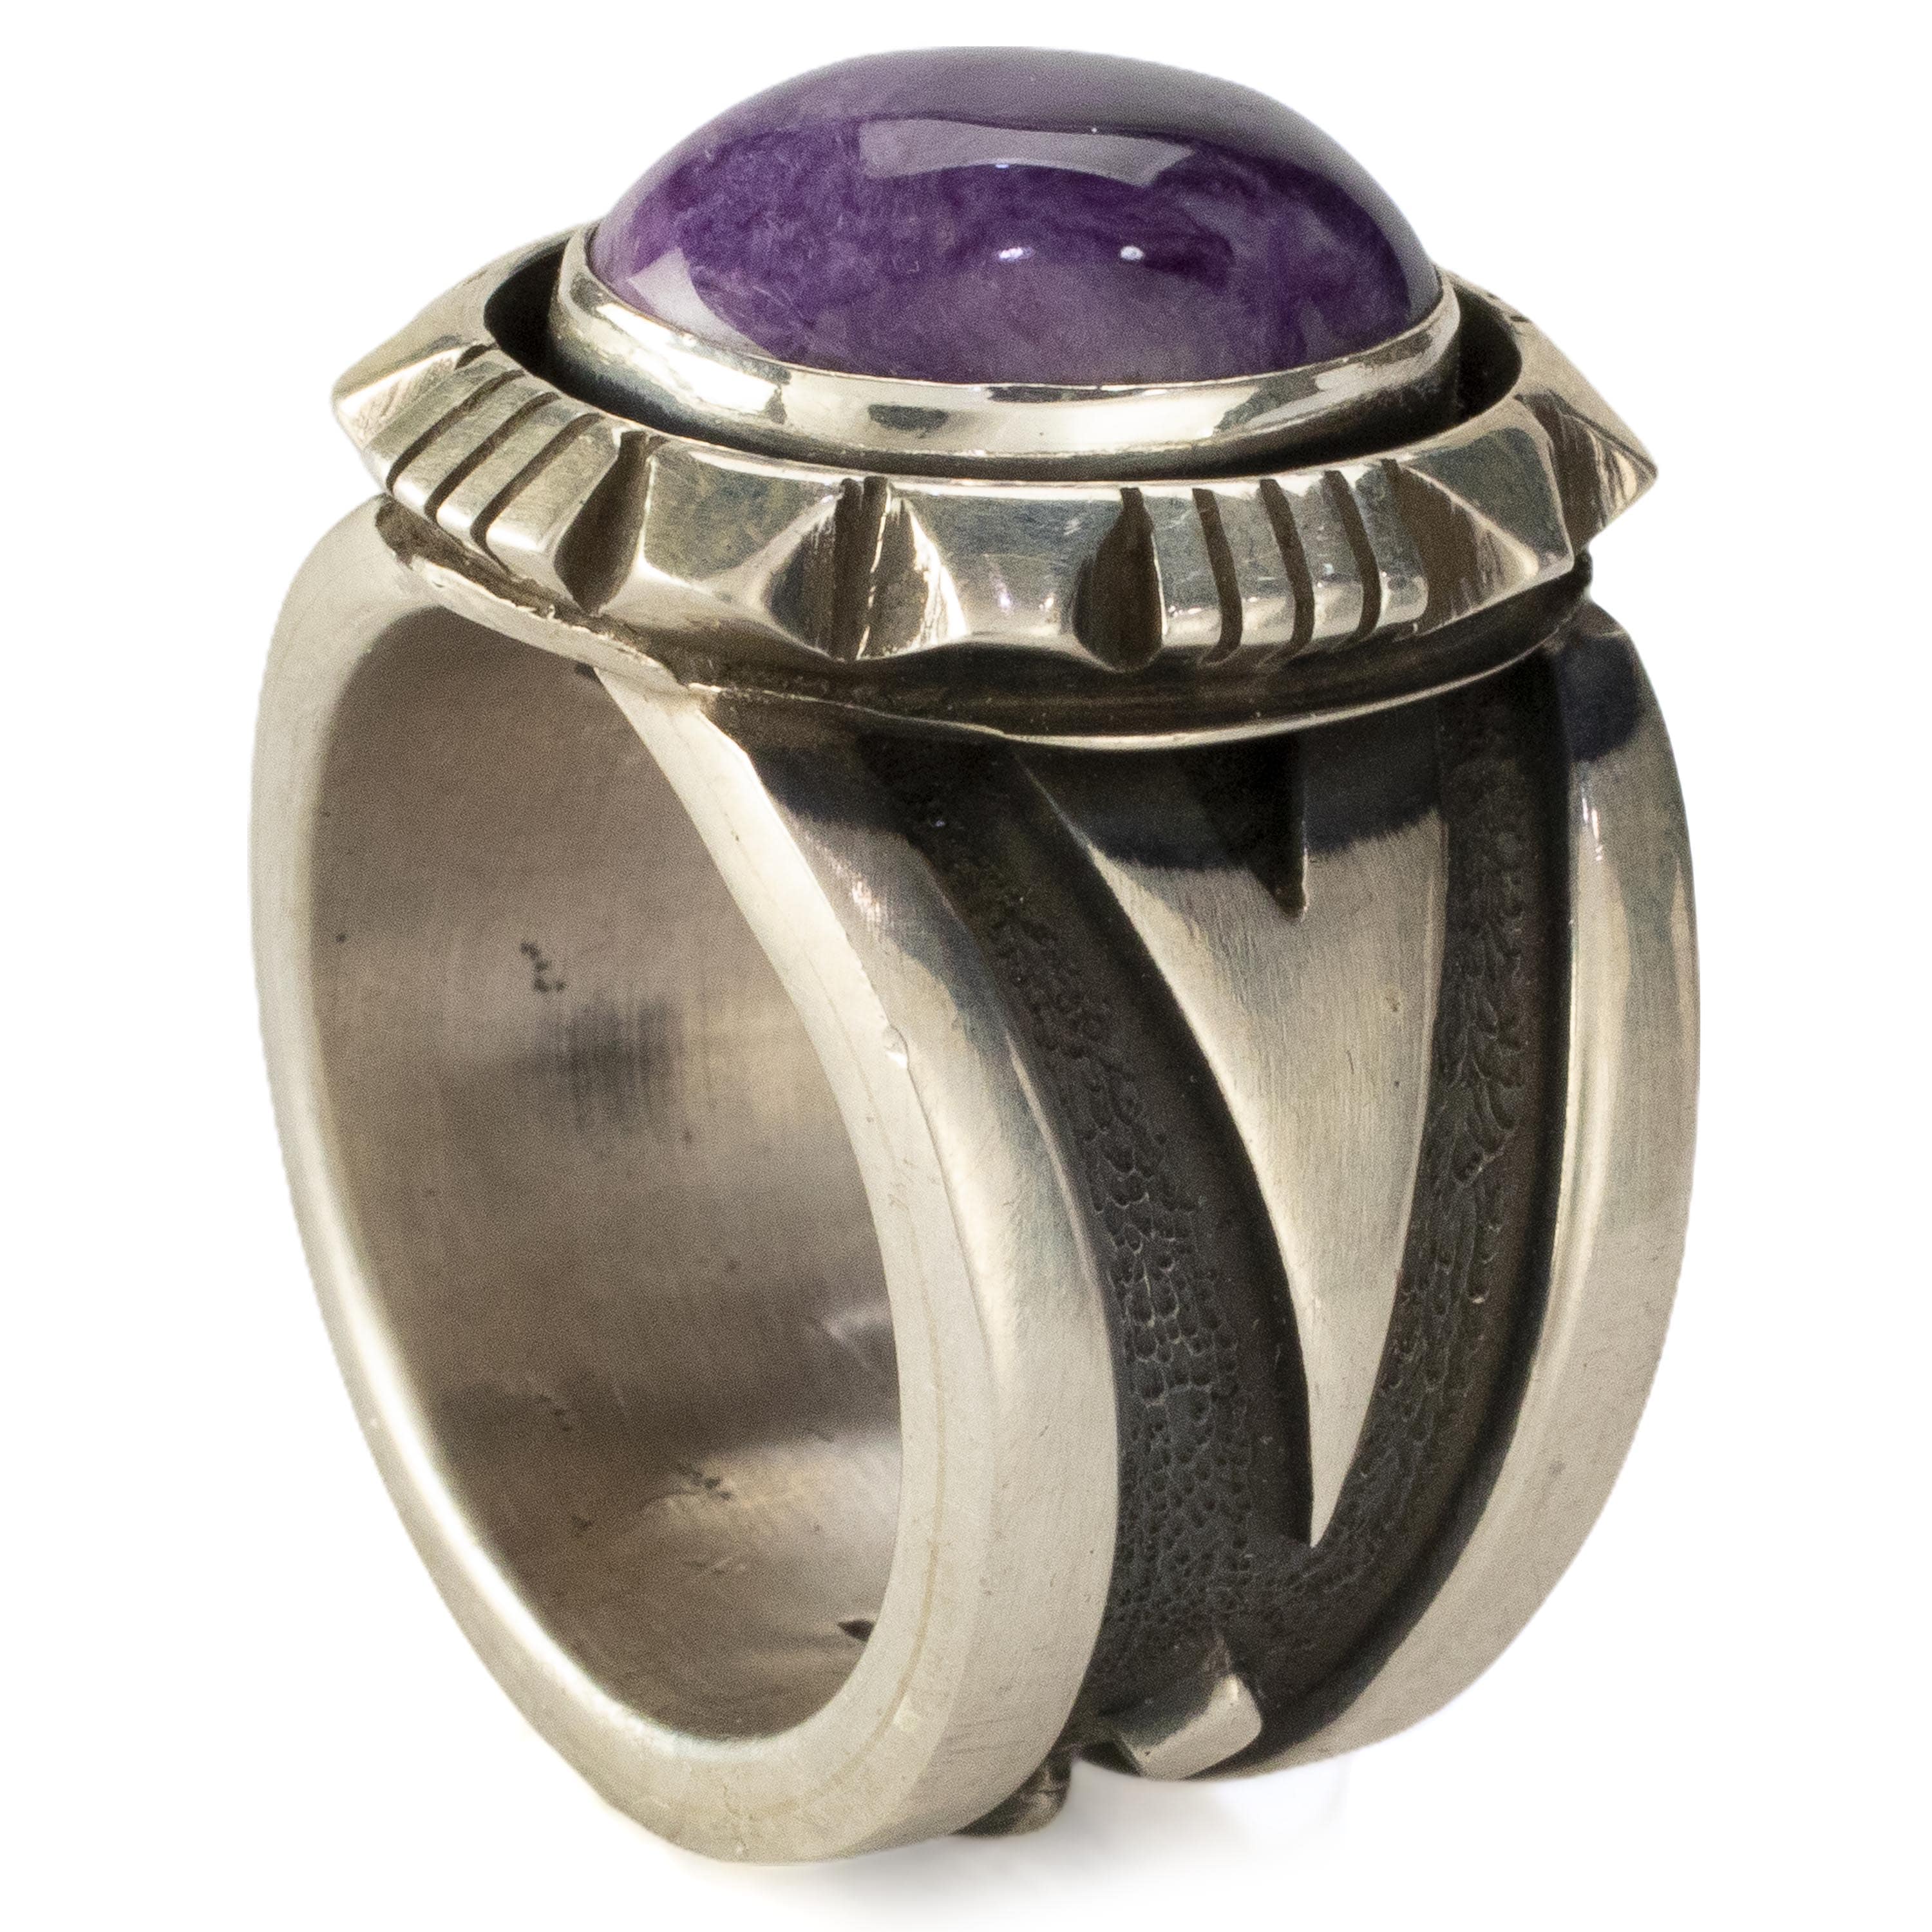 Kalifano Native American Jewelry Cooper Willie Navajo Charoite USA Native American Made 925 Sterling Silver Ring